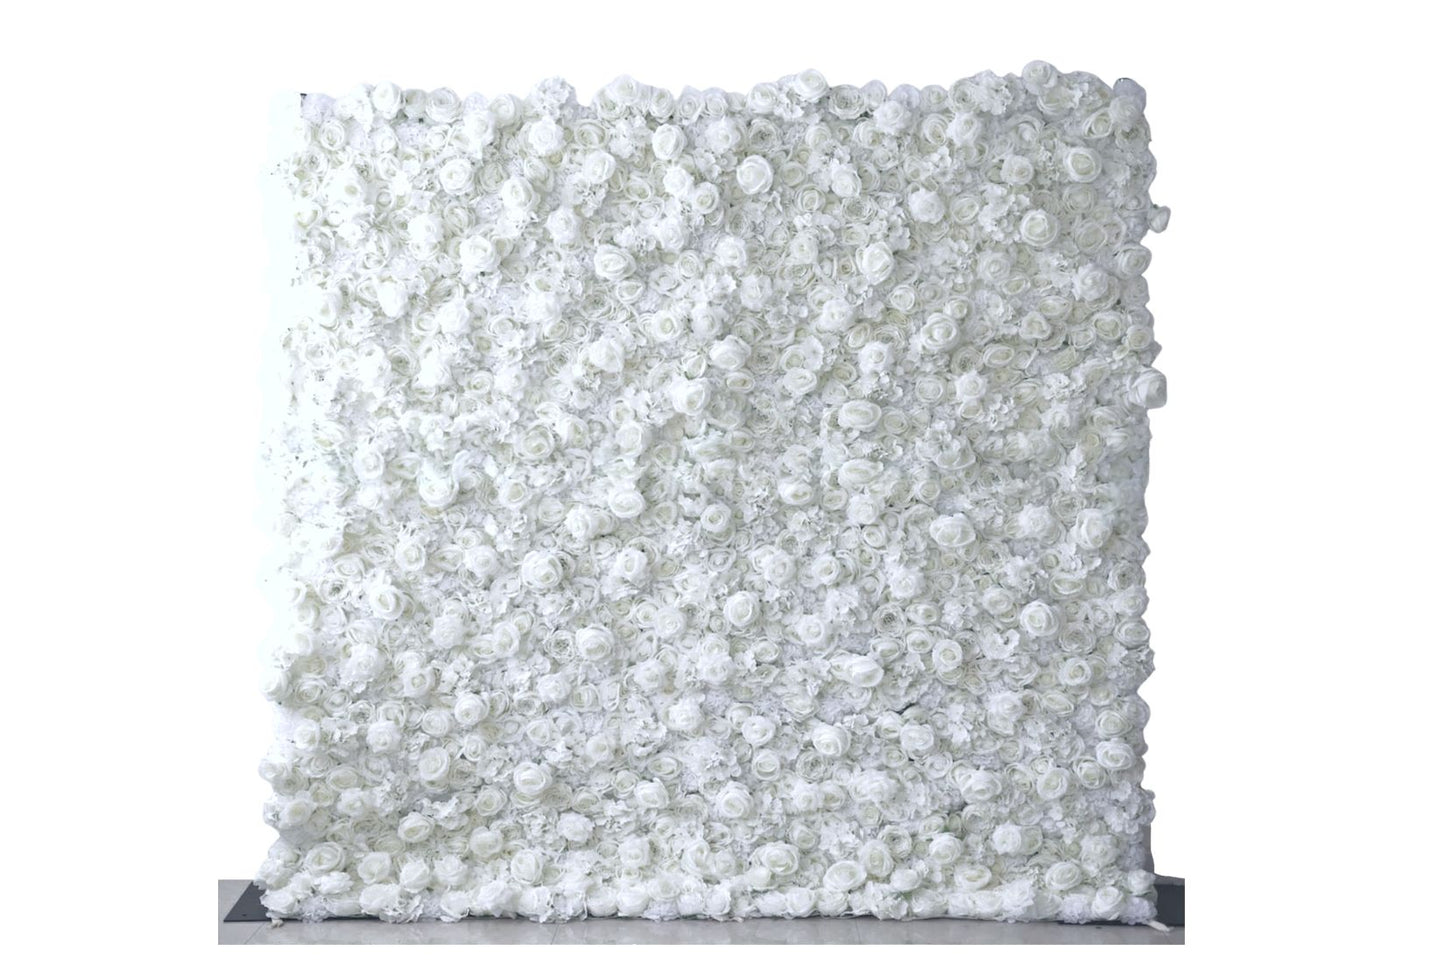 White flower wall for wedding, bridal or baby shower. Available for rent in Maryland.